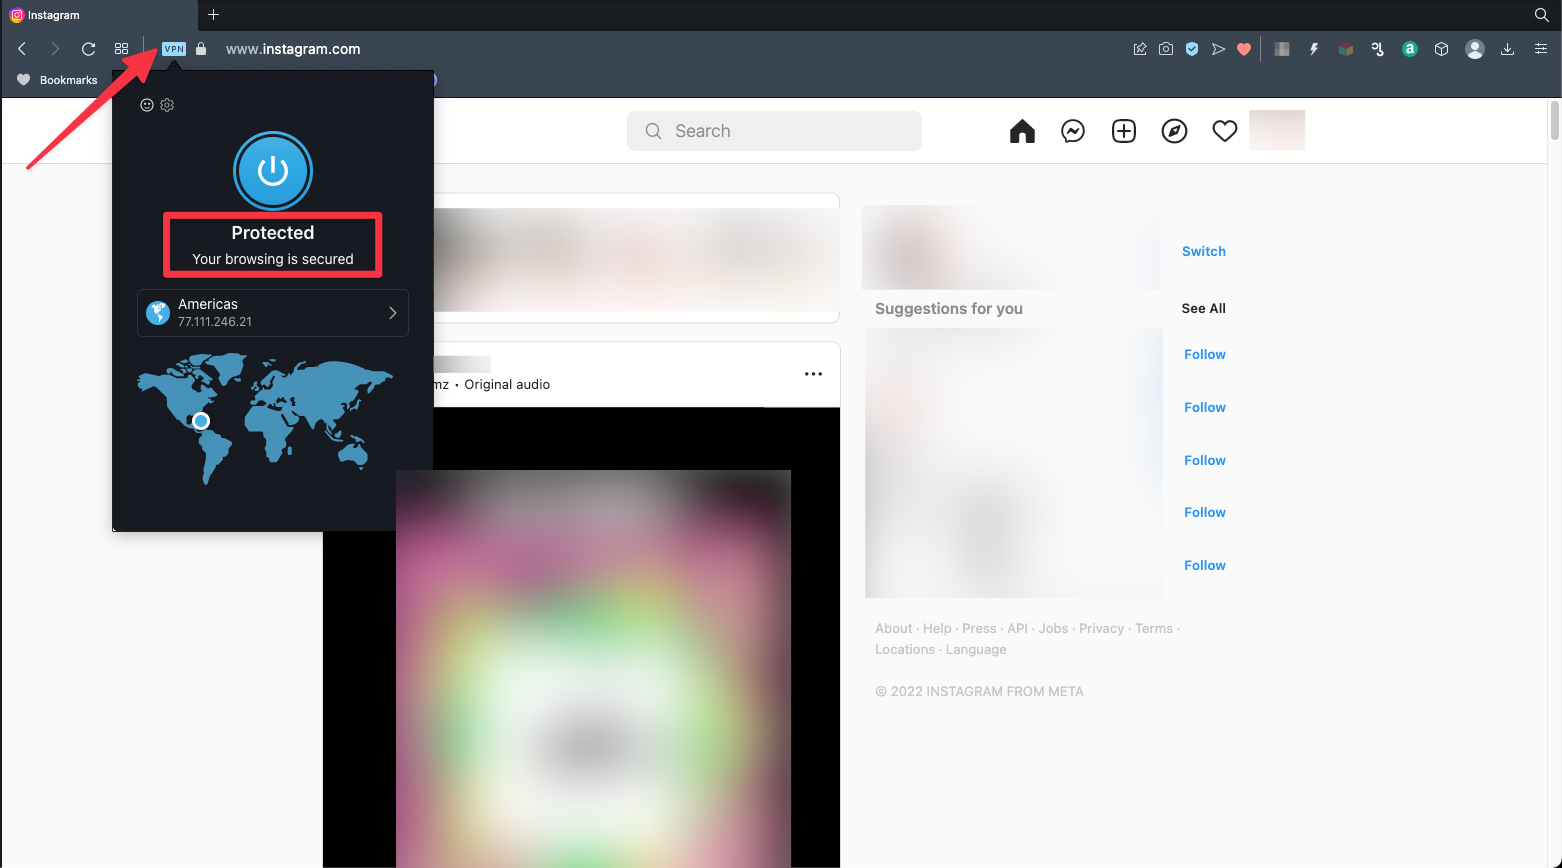 Remote.tools shows how to use instagram using VPN